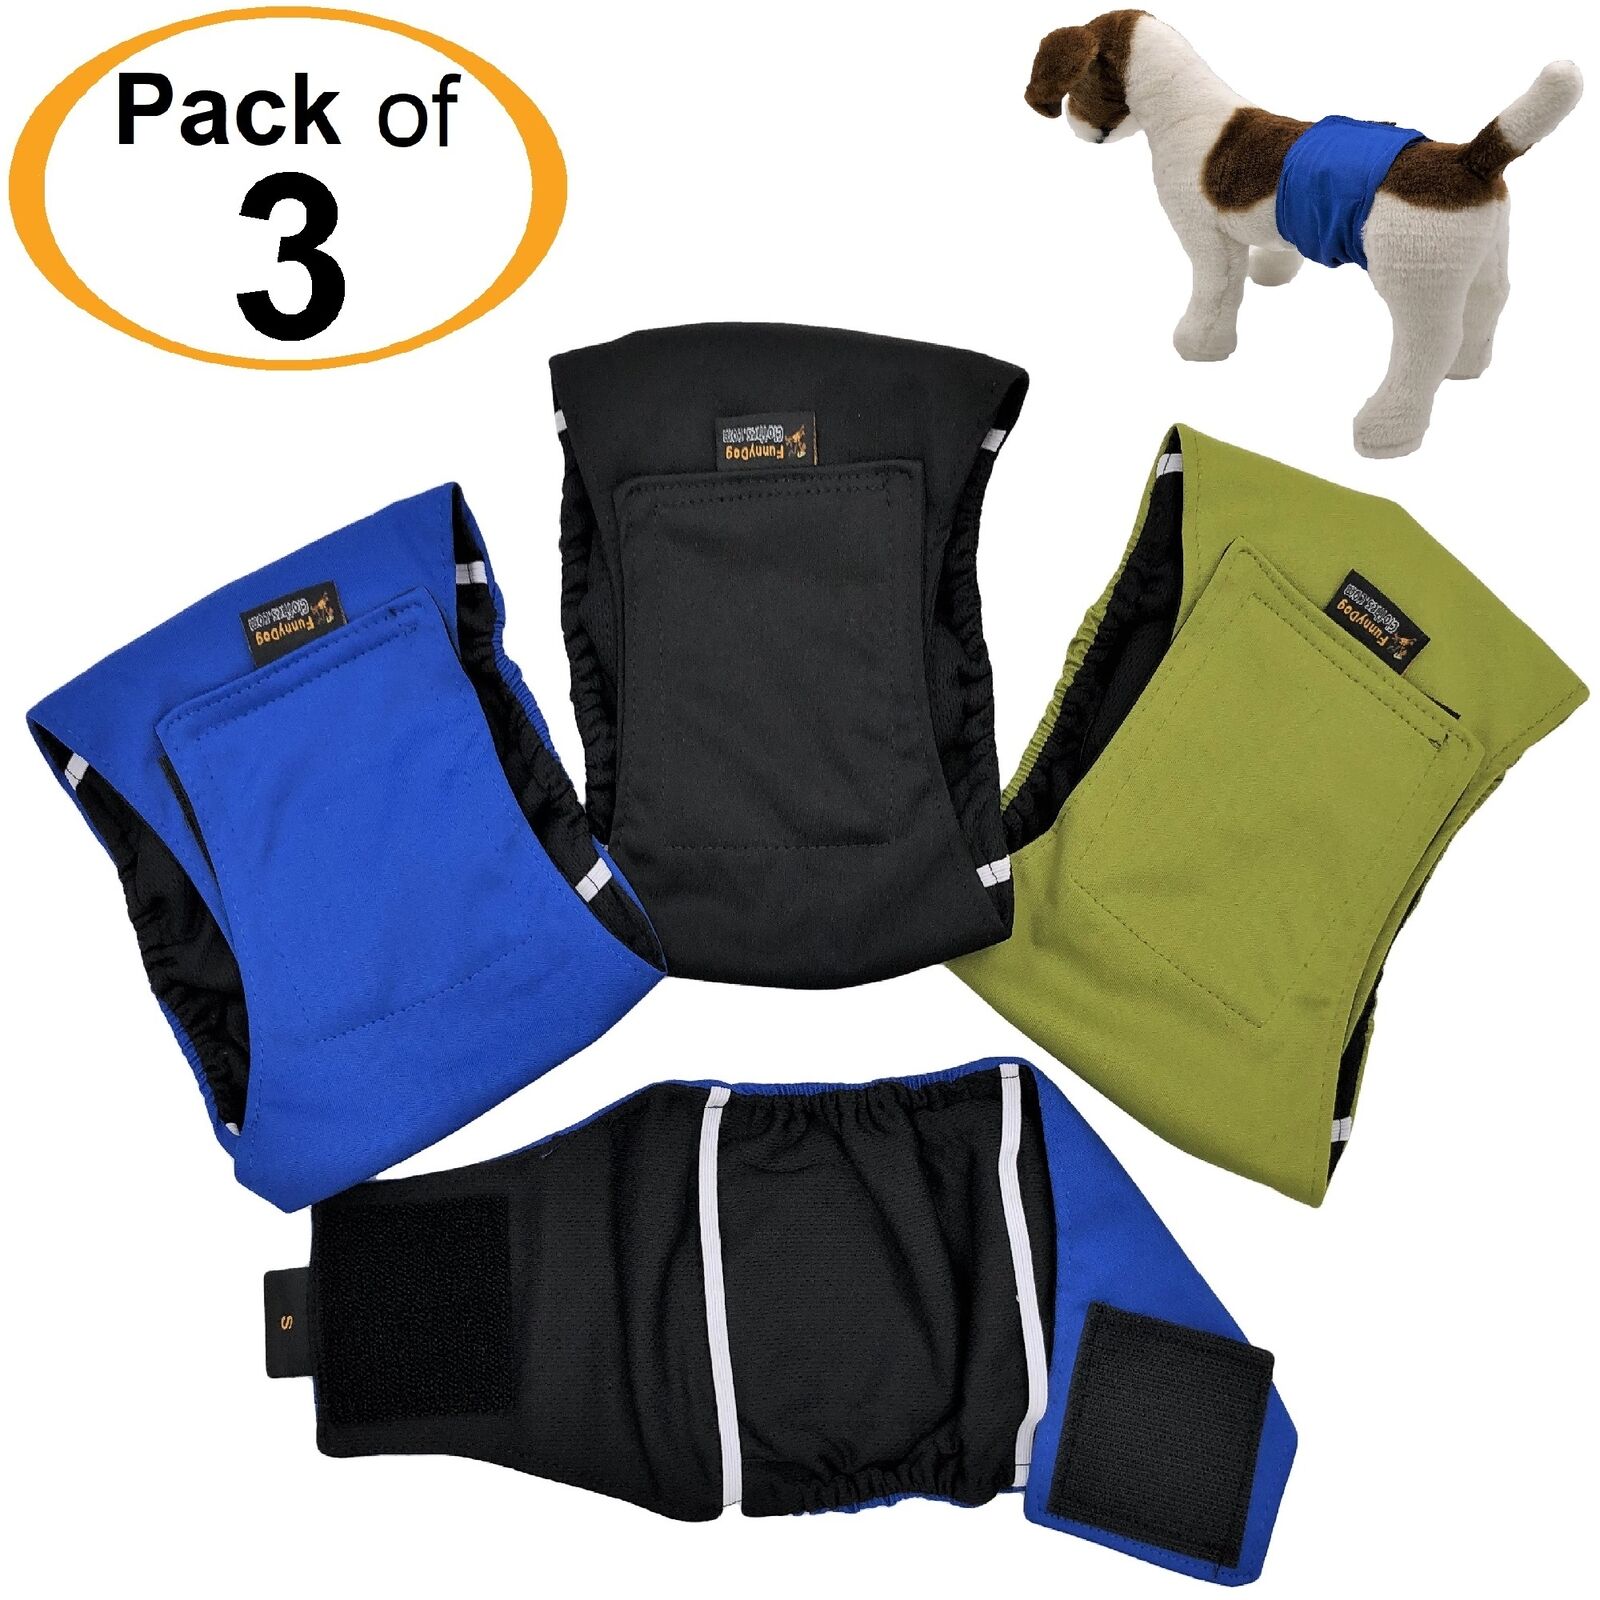 PACK of 3 LEAK PROOF Male Dog Diapers Belly Band Wrap Washable XS, S, M, L, XL